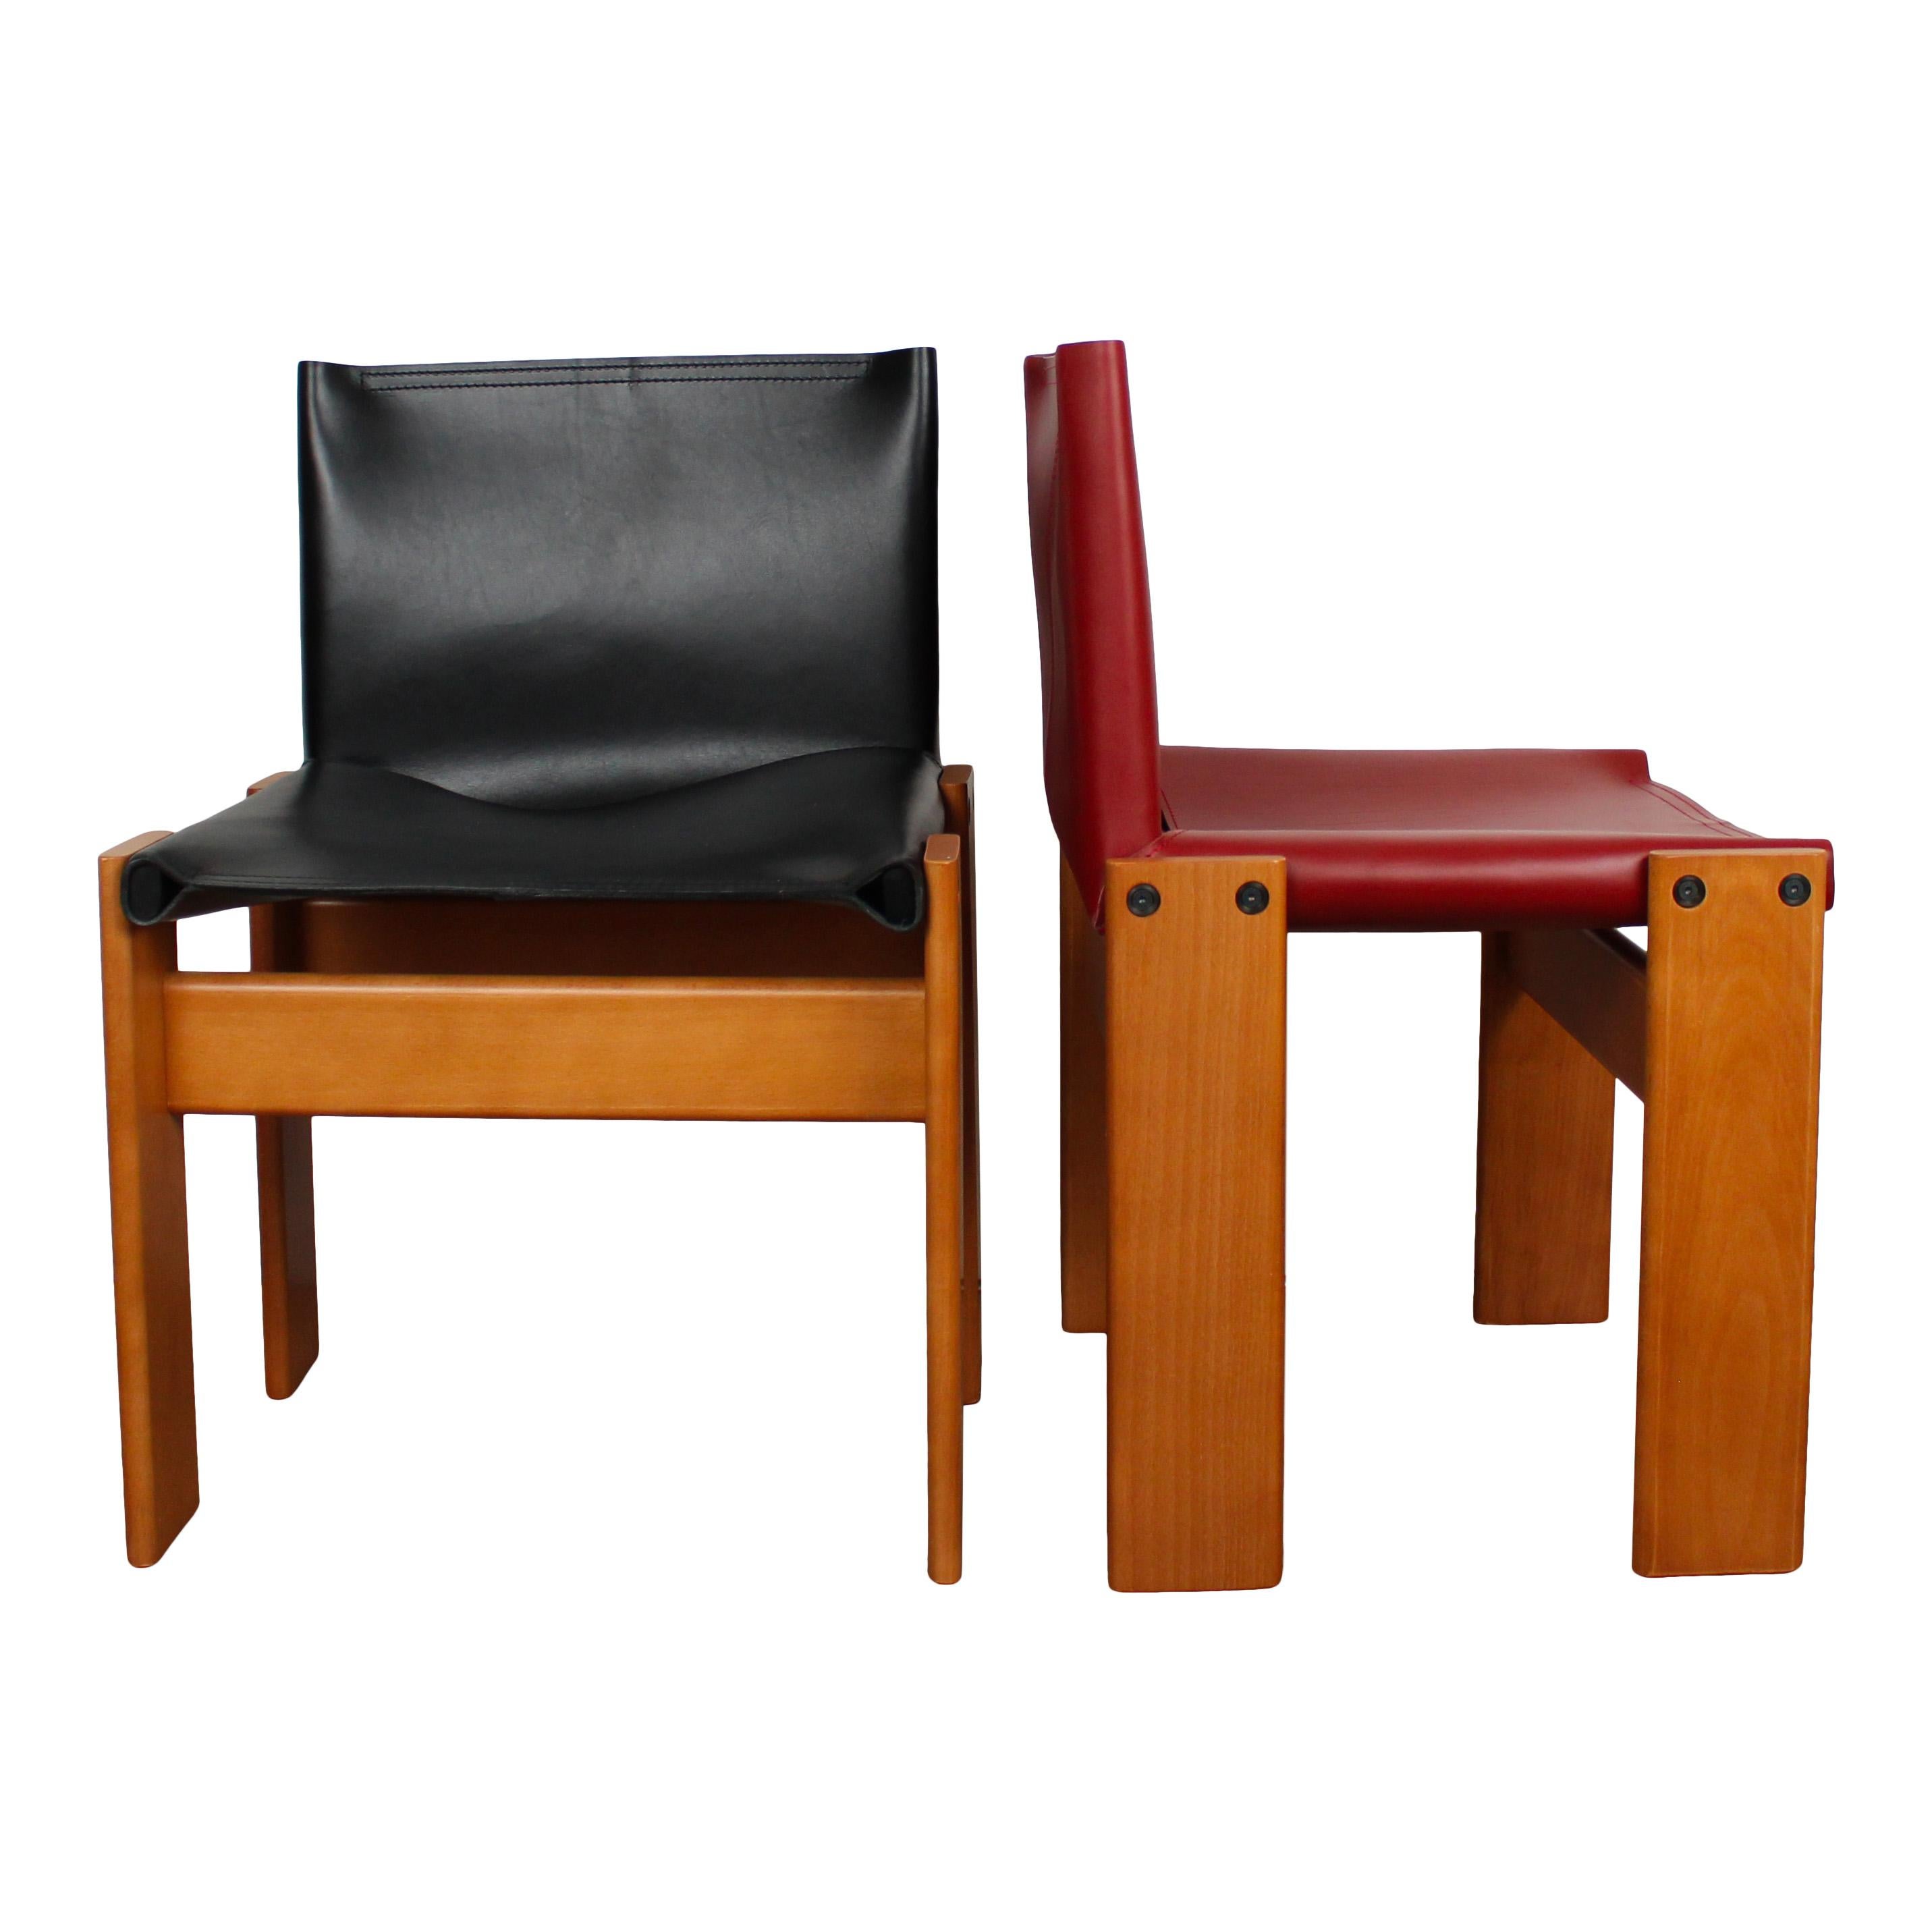 Afra & Tobia Scarpa Black & Red Leather Monk Dining Chair for Molteni, Set of 8 In Good Condition For Sale In Vicenza, IT